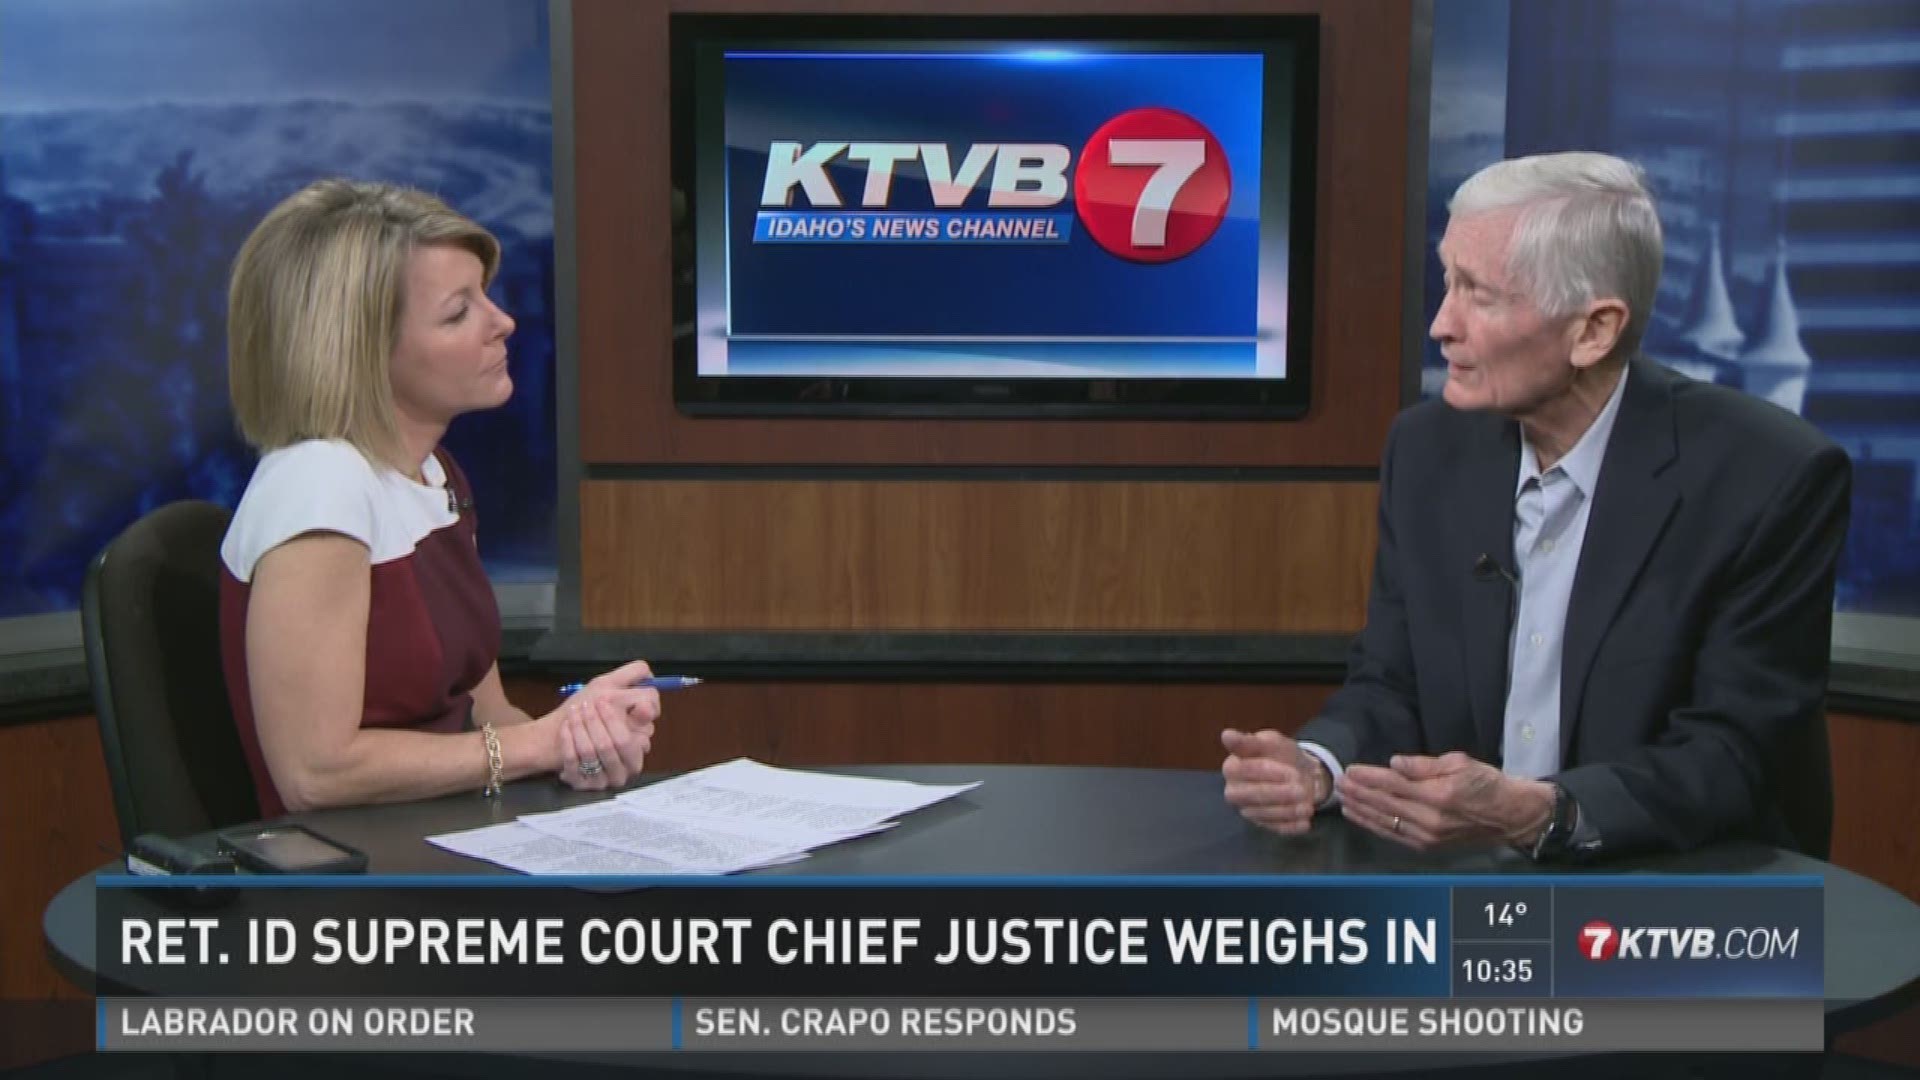 Former Idaho Supreme Court Chief Justice Jim Jones sat down with Kim Fields to discuss the ramifications of President Trump's executive order banning travel from seven countries.